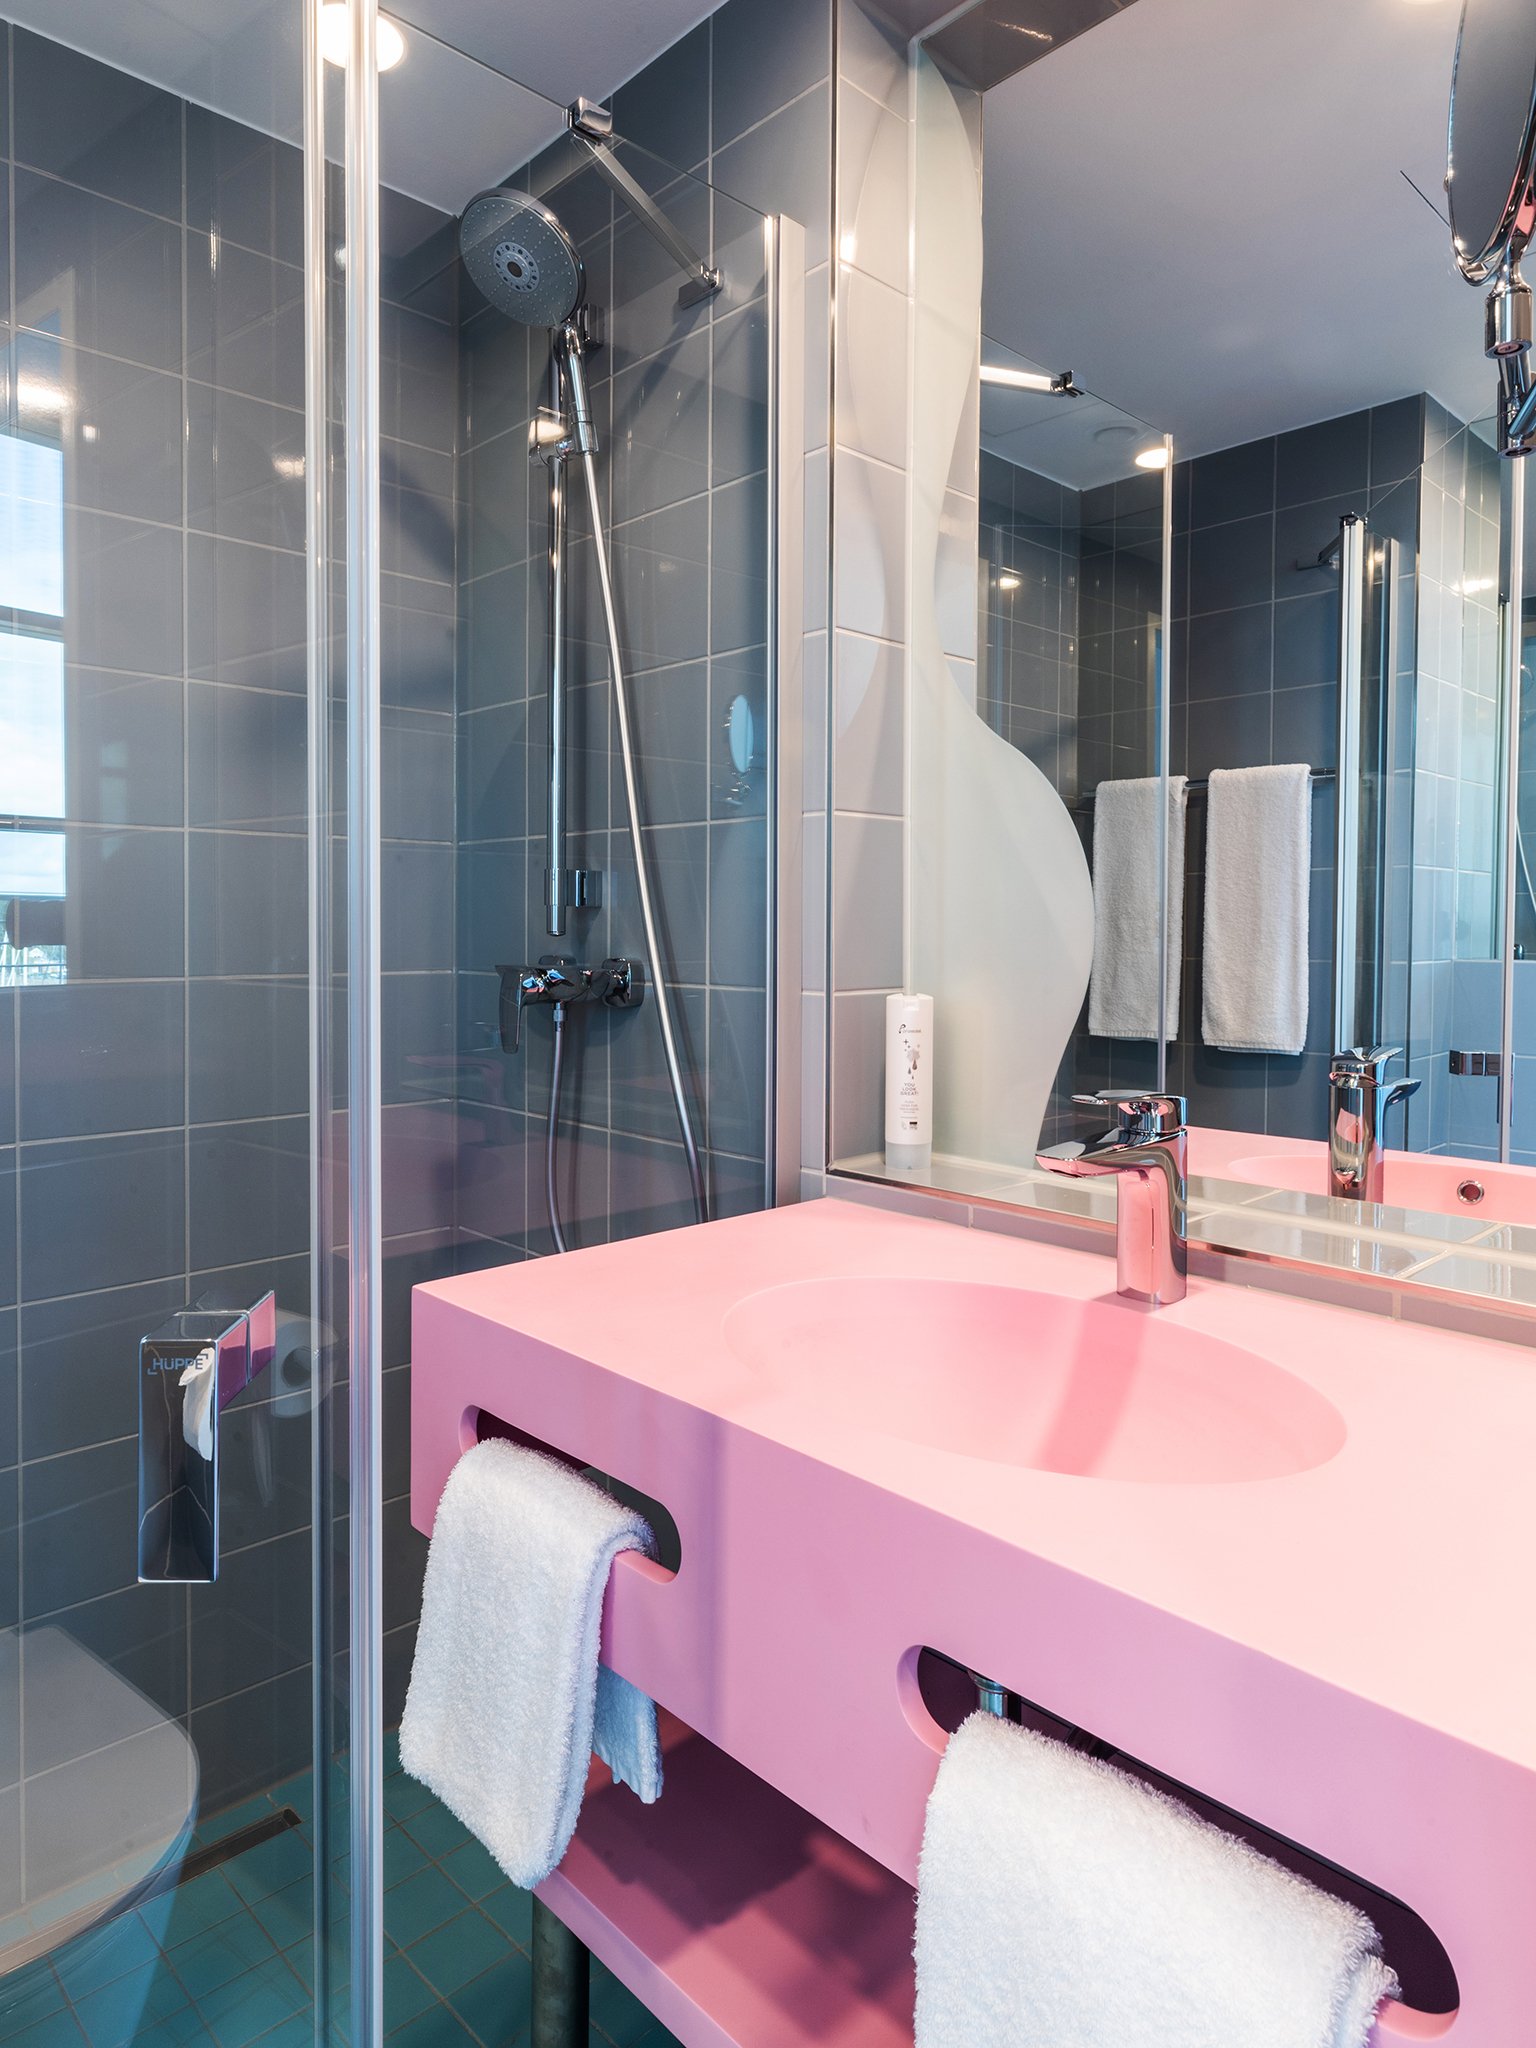 The bathroom of the prizeotel Rostock-City with pink washbasin